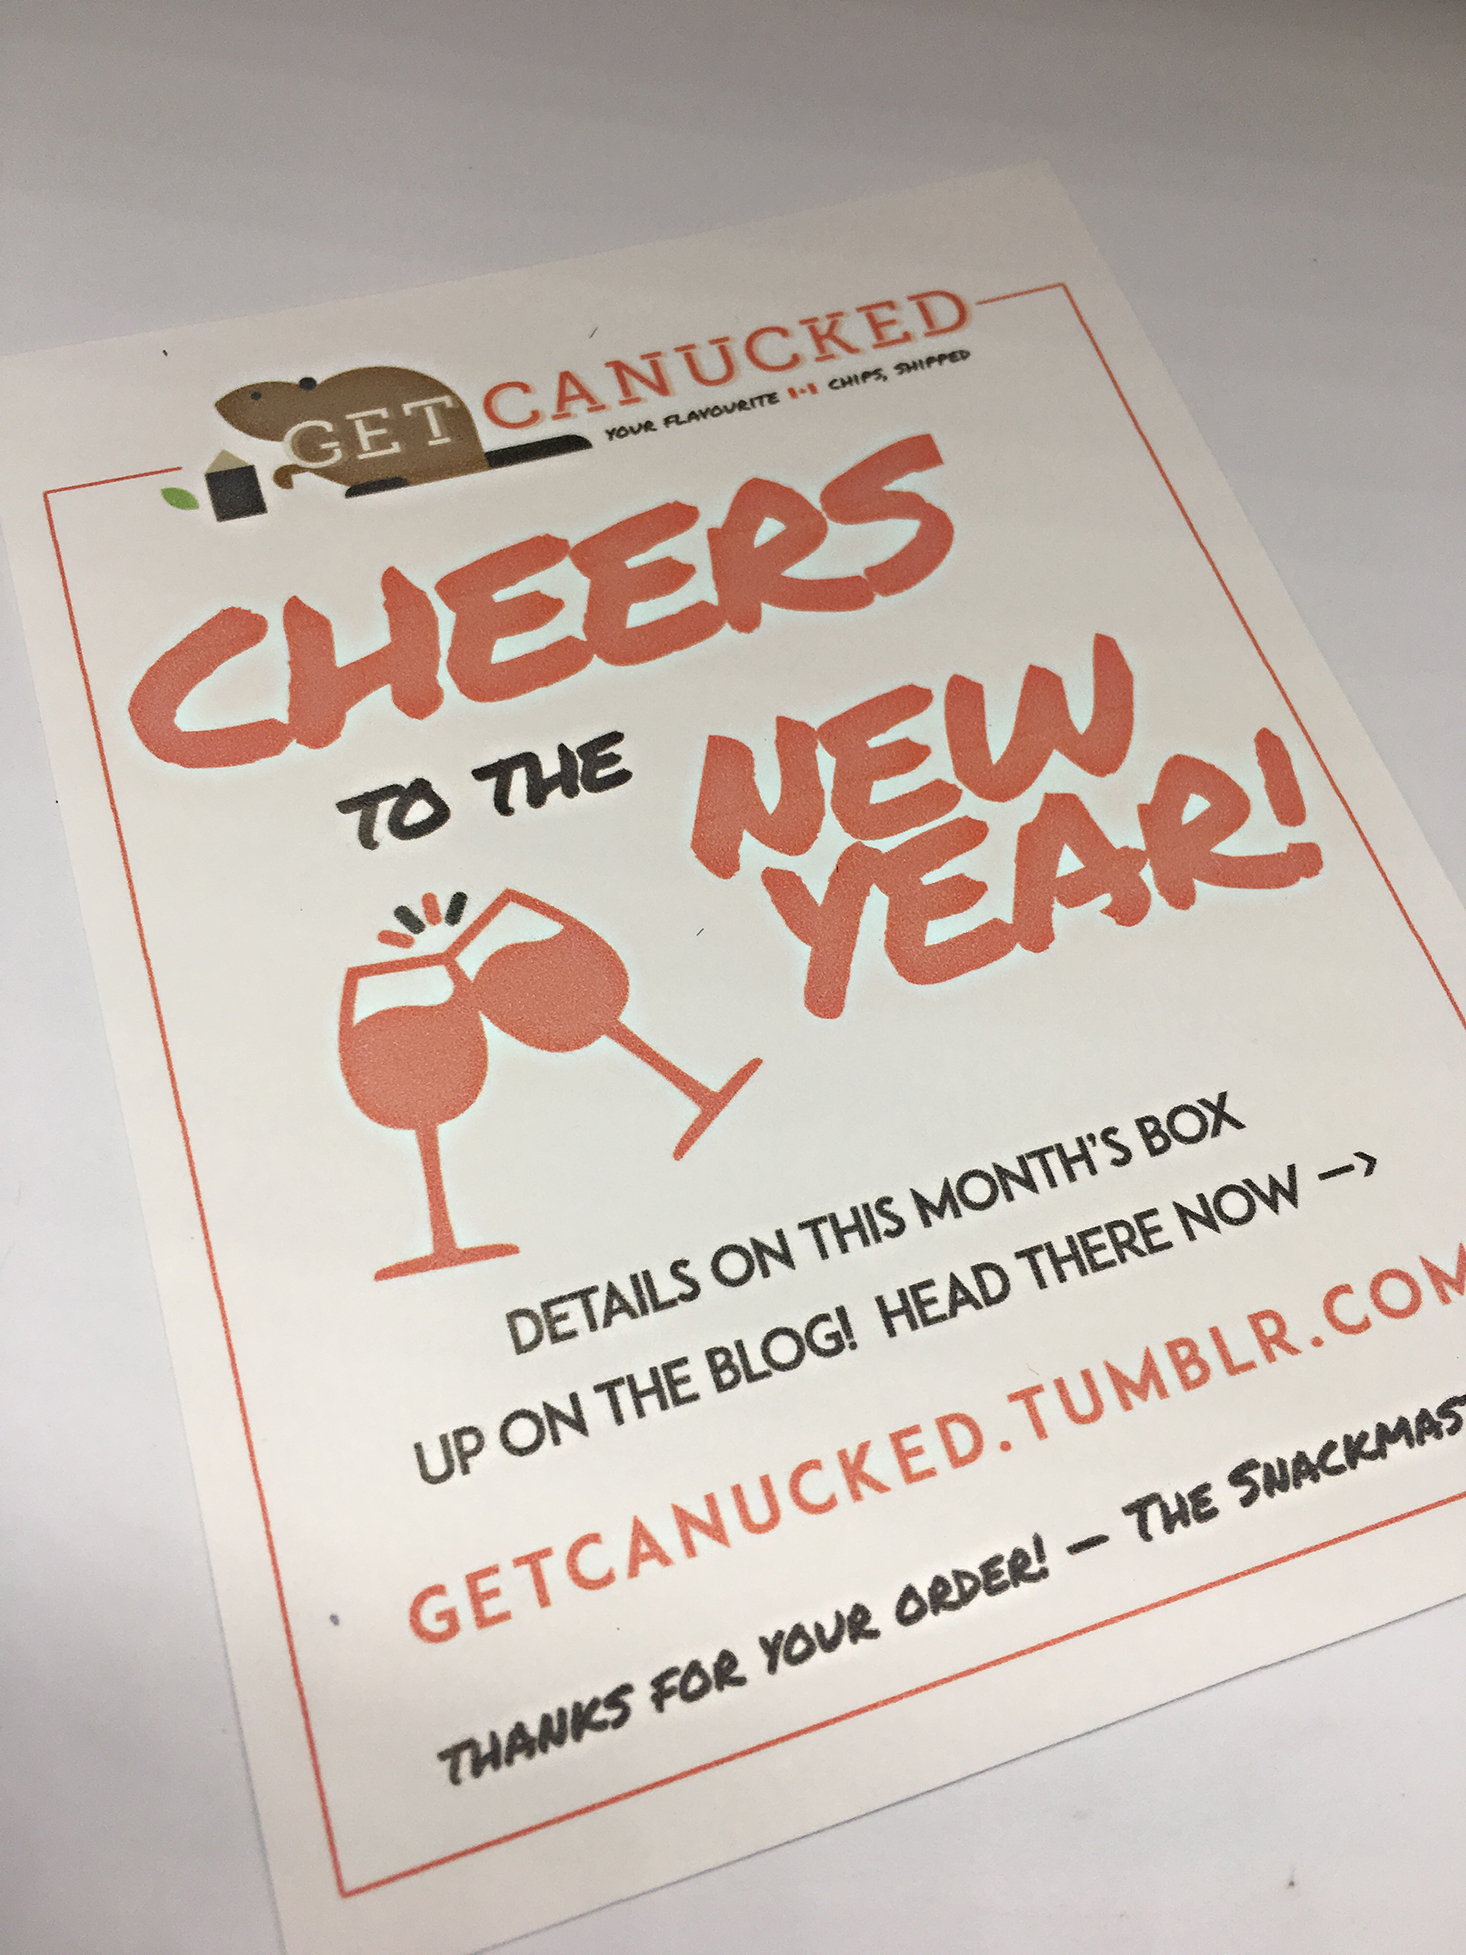 Get-Canucked-January-2017-Info-Card